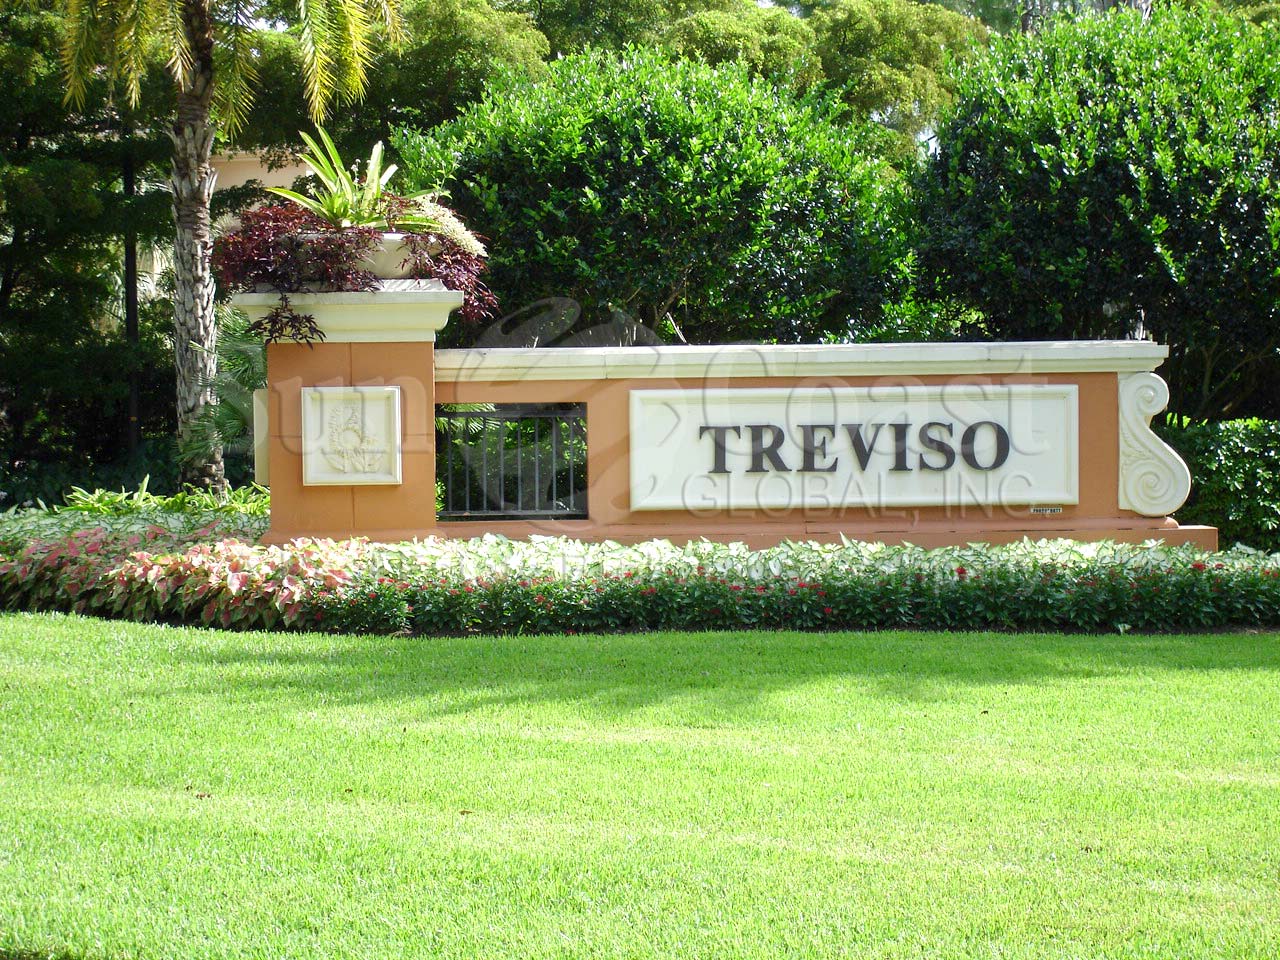 Treviso sign